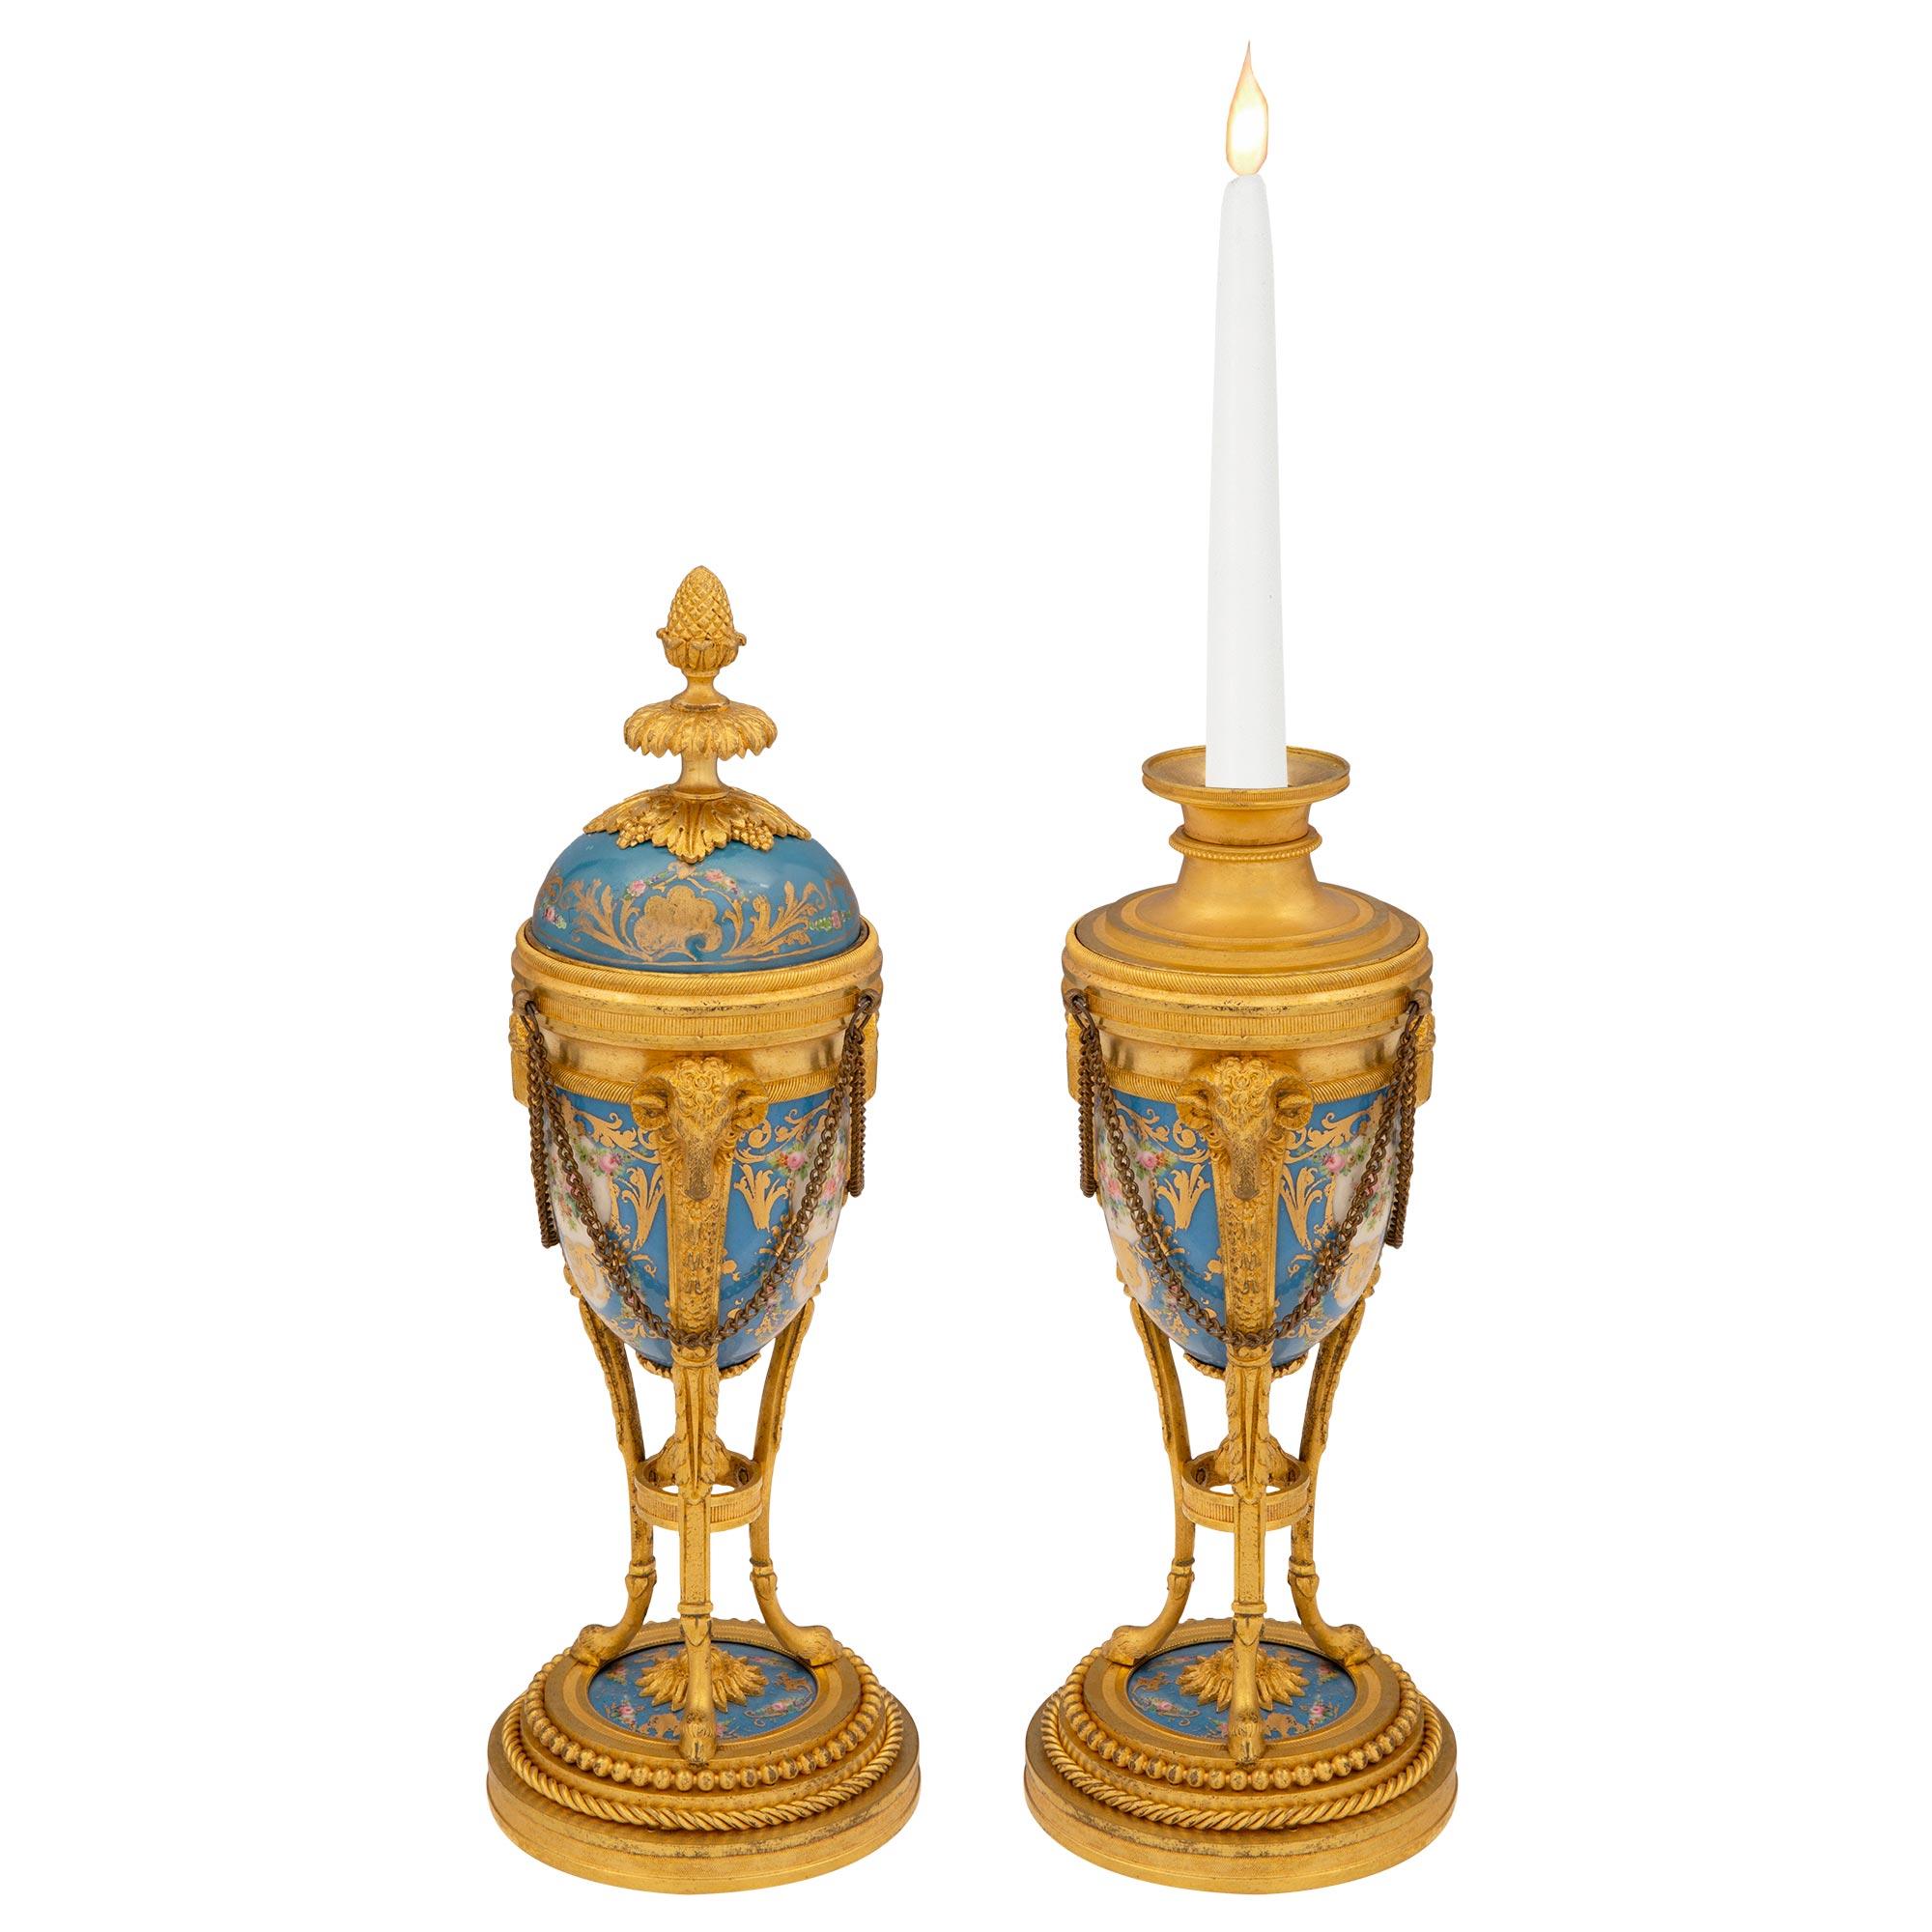 Pair of French 19th Century Louis XVI St. Porcelain and Ormolu Cassolettes